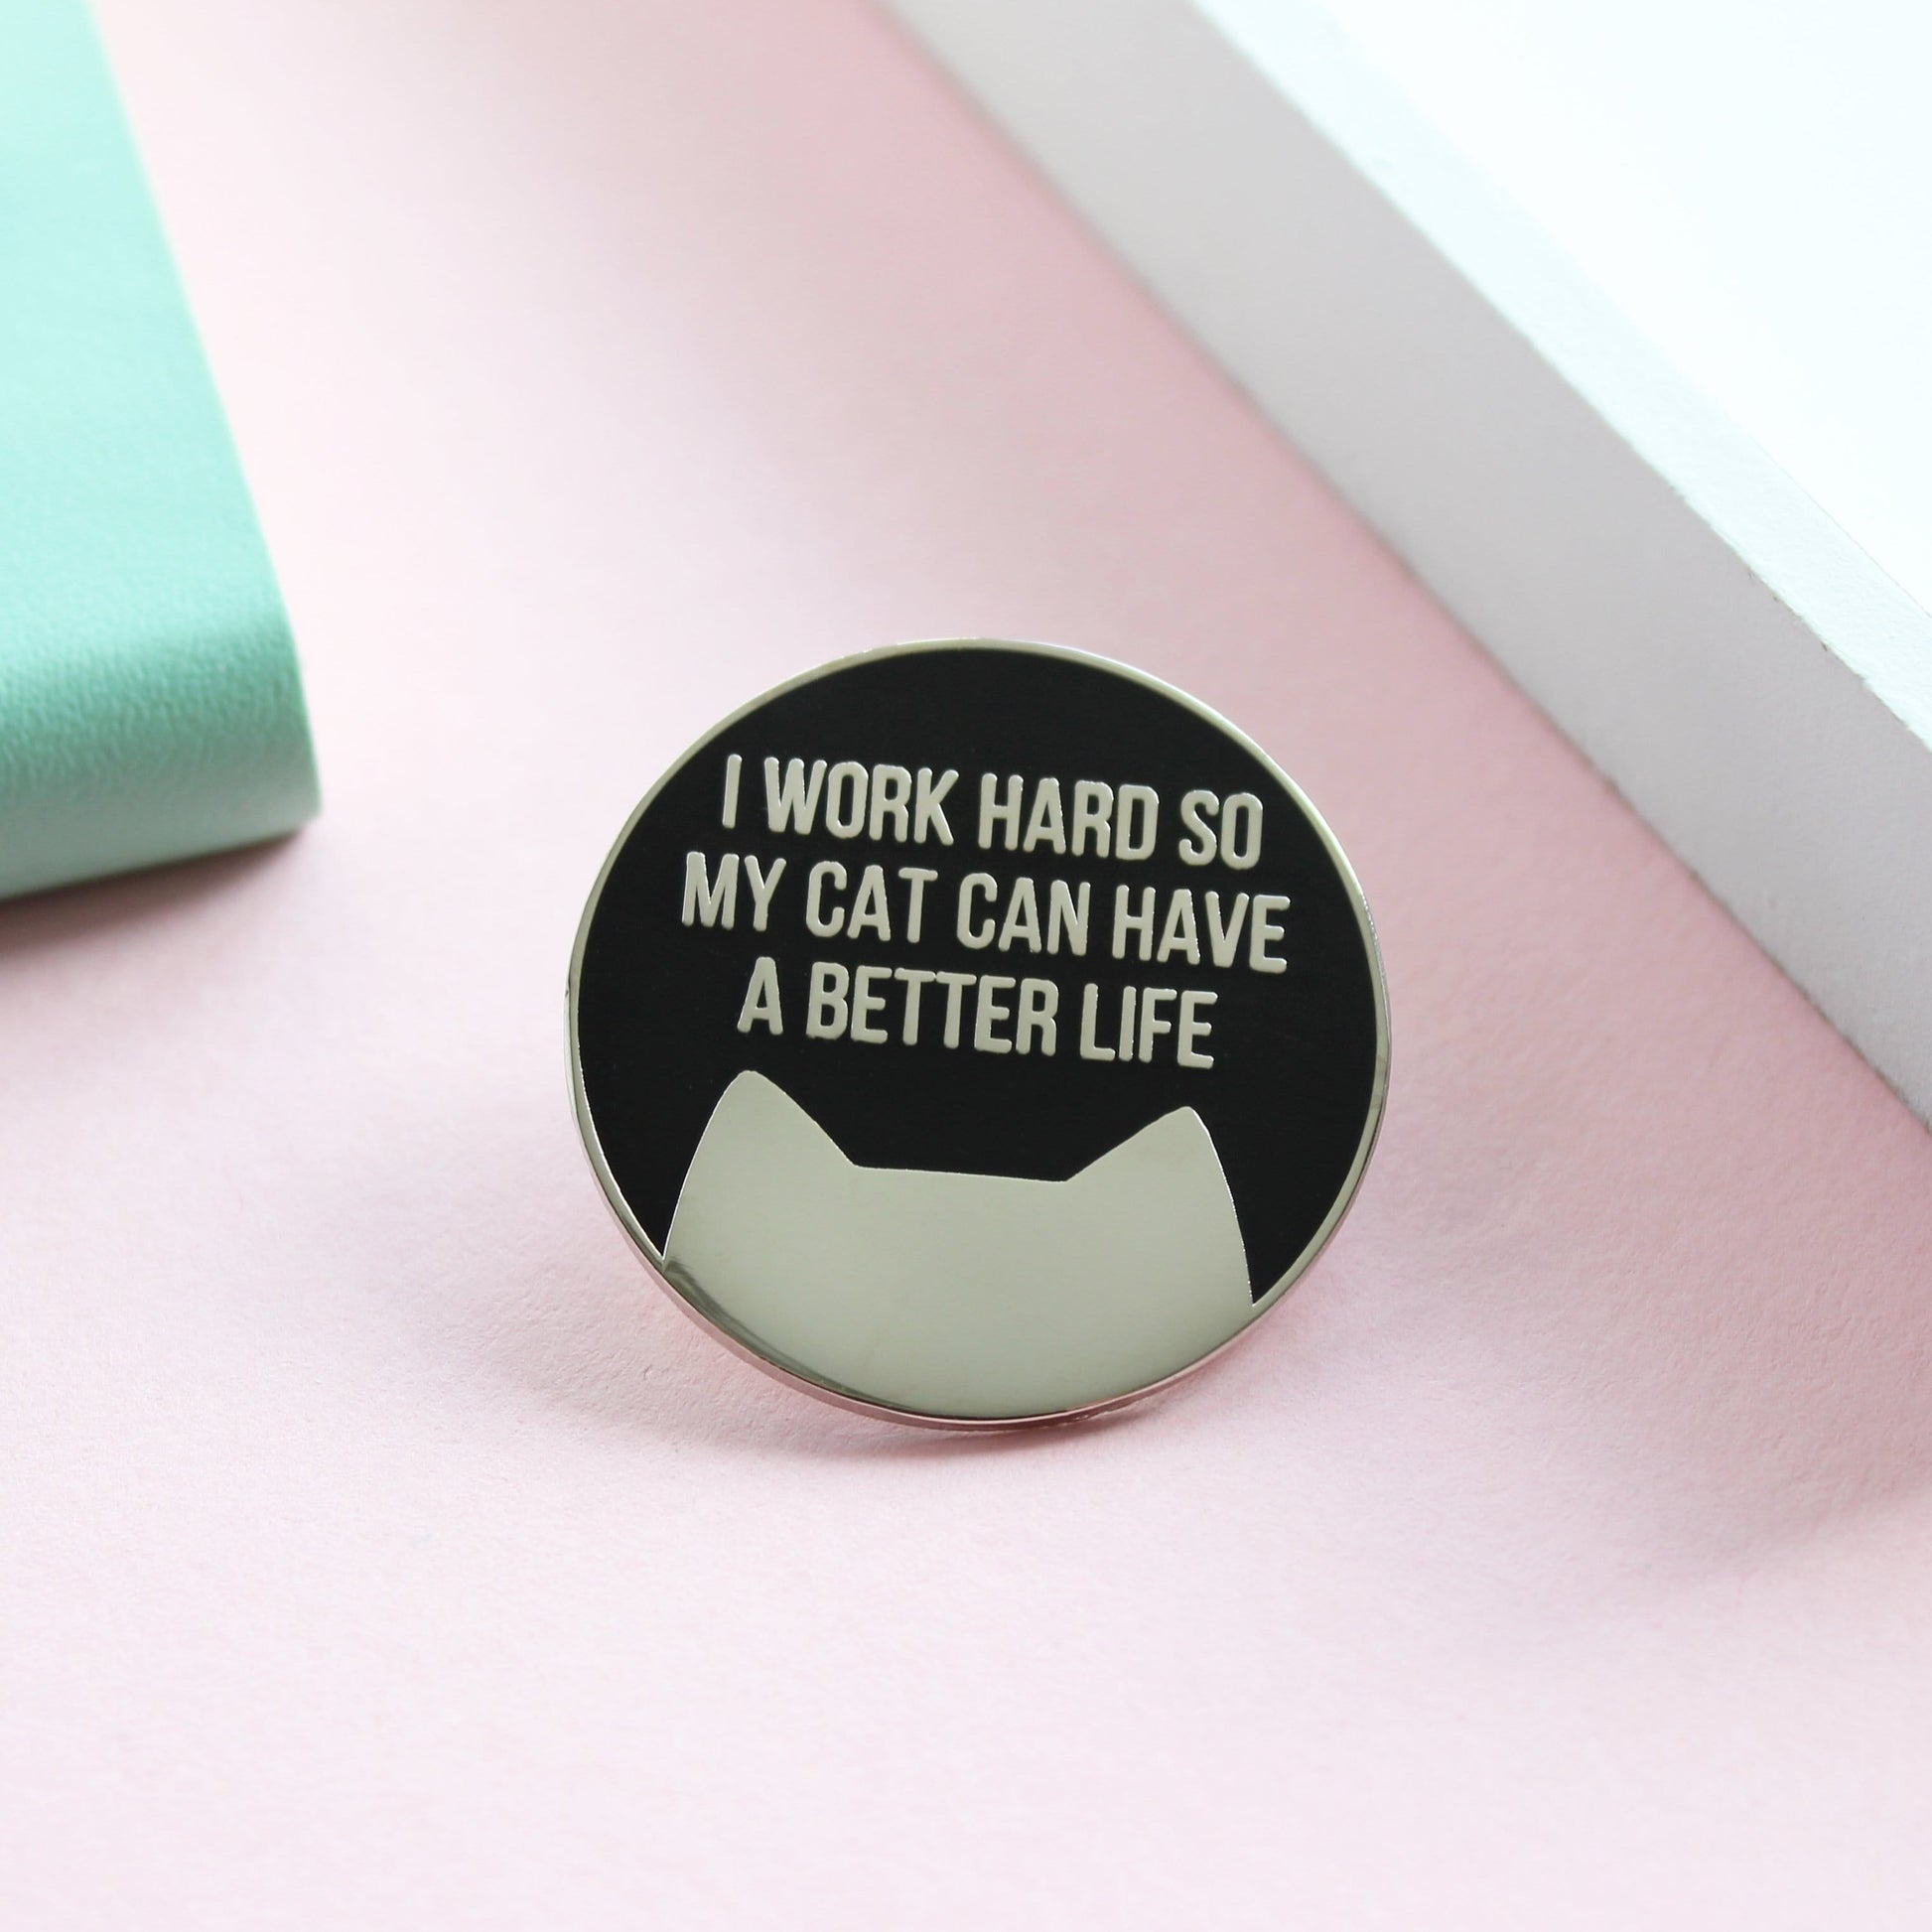 Work hard for my cat enamel pin badge from Purple Tree Designs